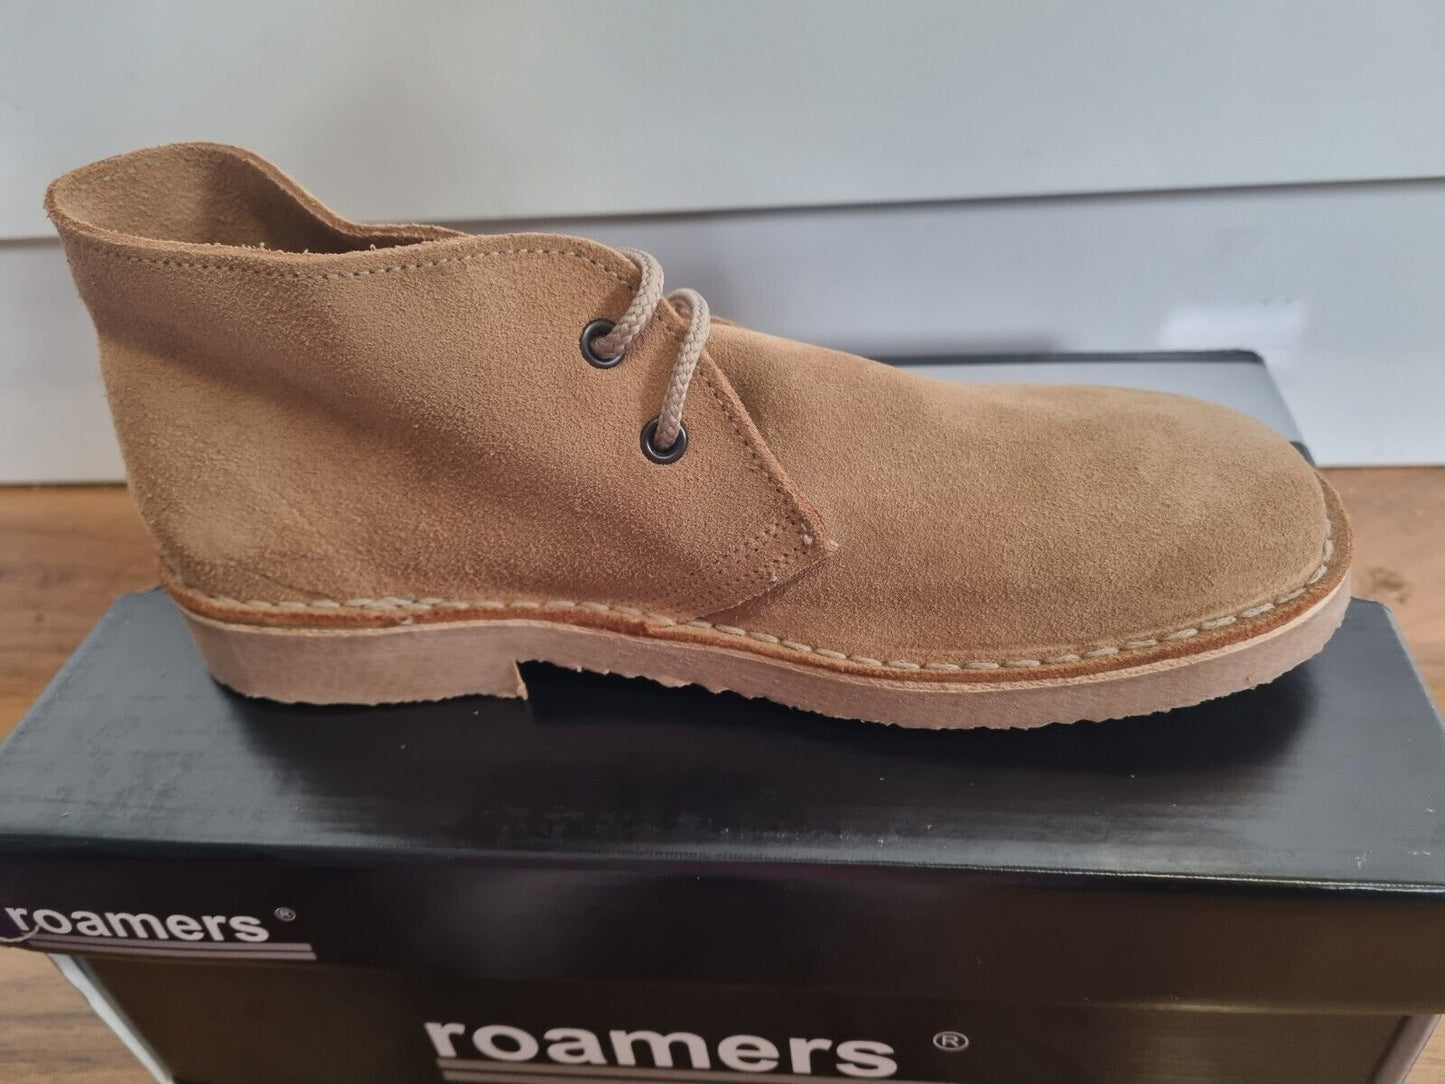 Desert Boot by Roamers - Round Toe - Stone Suede Leather (M400TS)